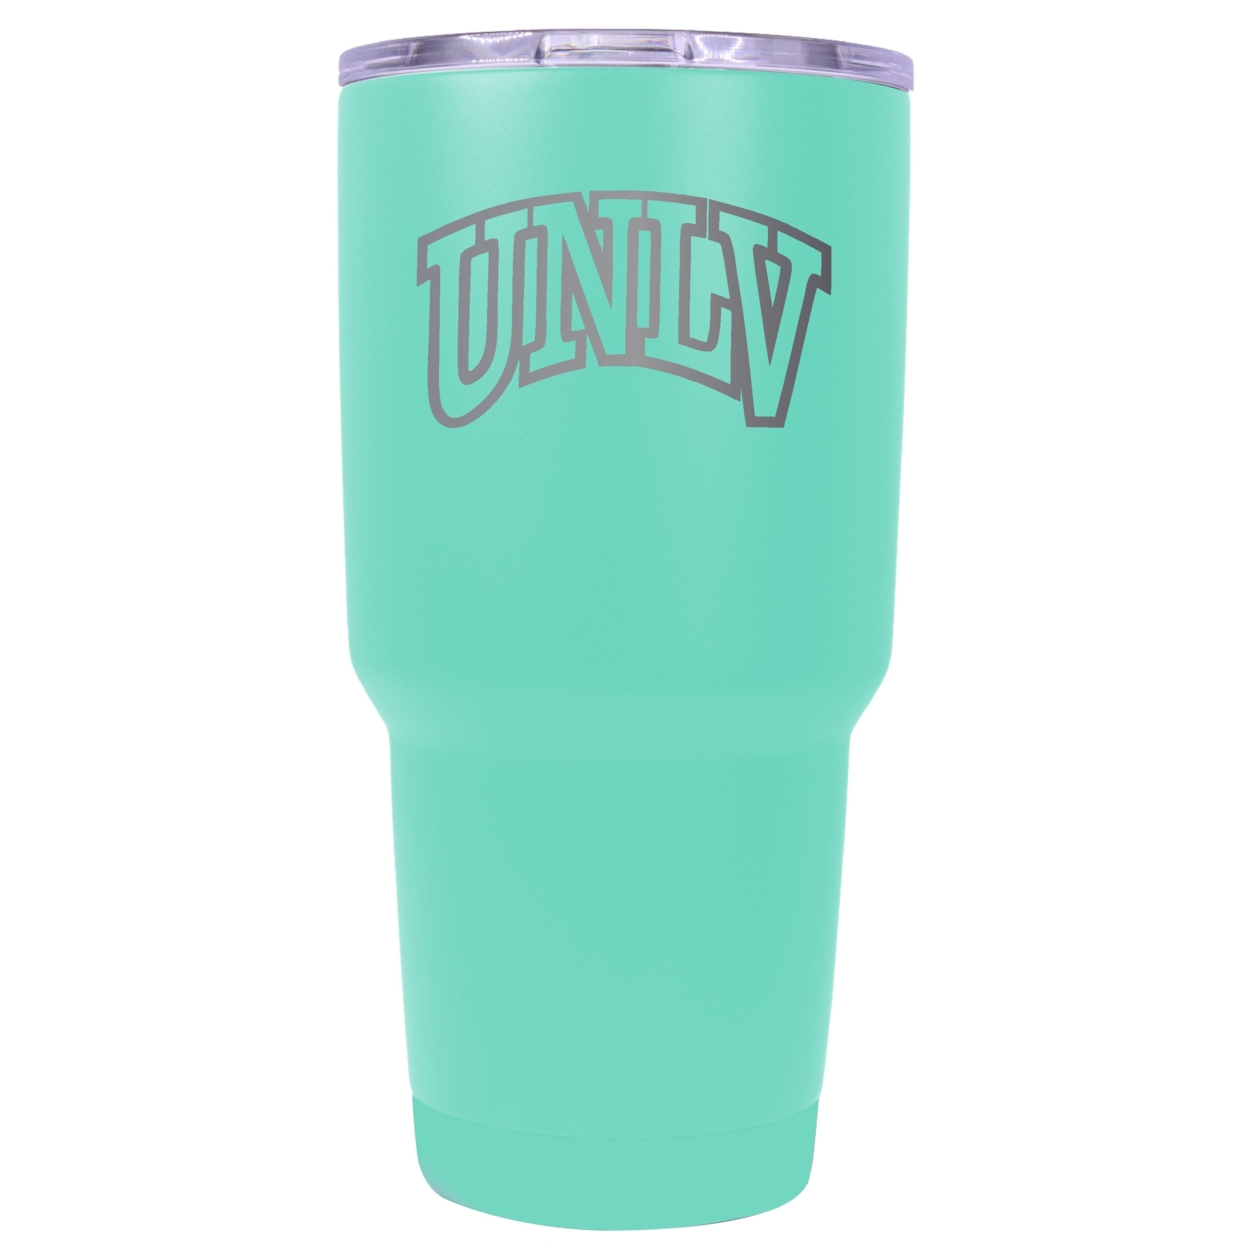 UNLV Rebels 24 Oz Laser Engraved Stainless Steel Insulated Tumbler - Choose Your Color. - Seafoam